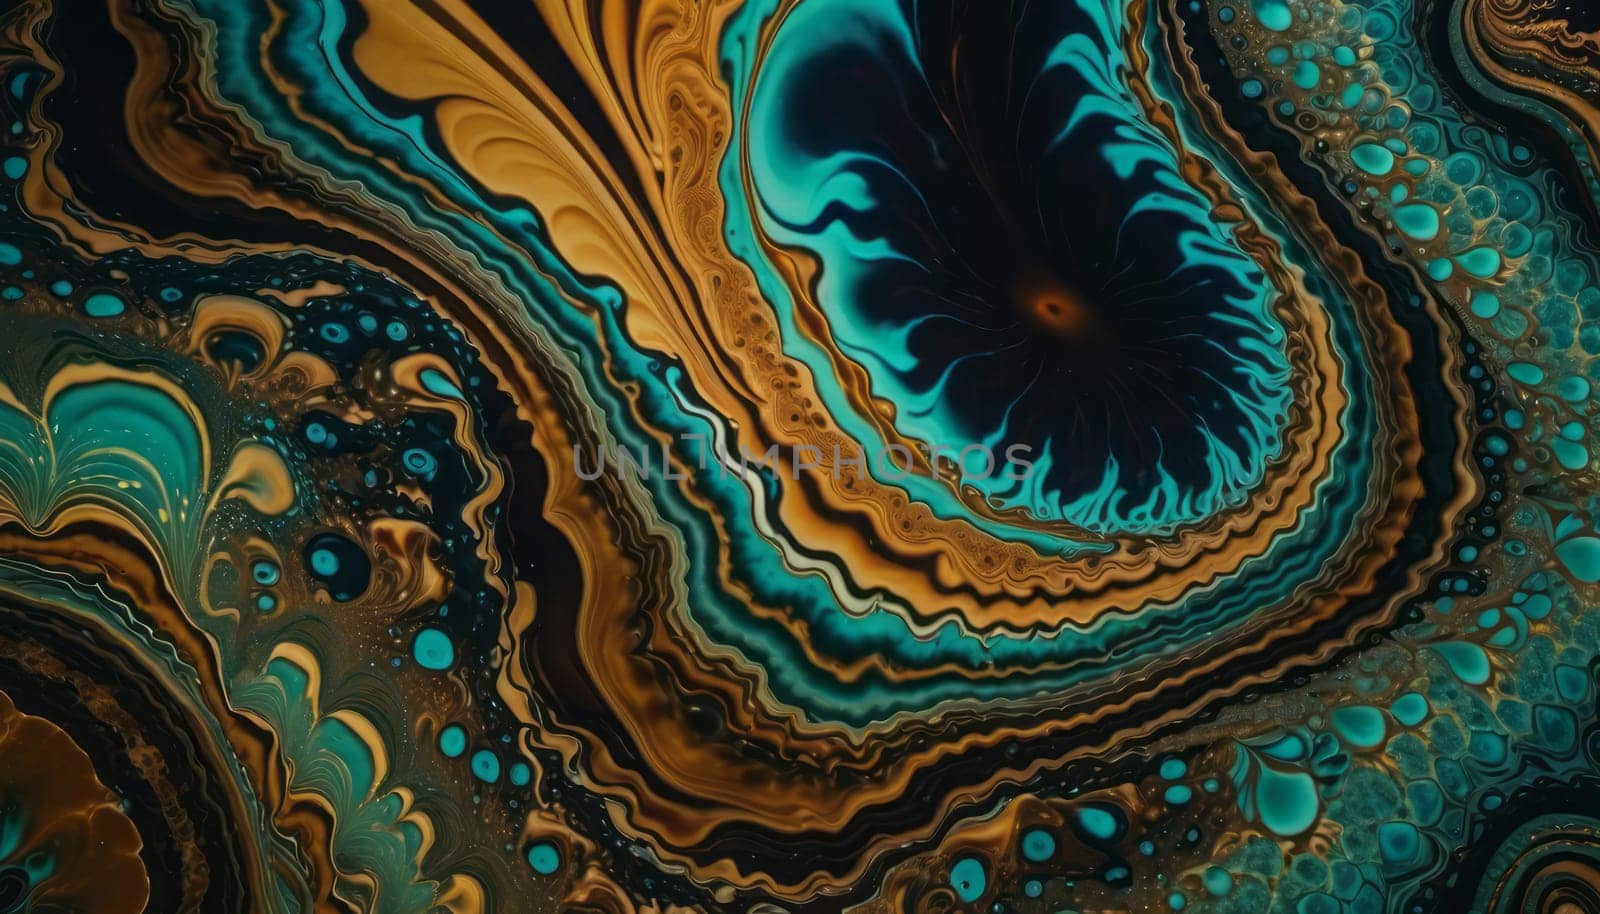 This image showcases an abstract pattern that resembles fluid dynamics. The swirling shapes and curves in shades of blue, gold, and black create a visually striking contrast, giving the image a dramatic and intense mood